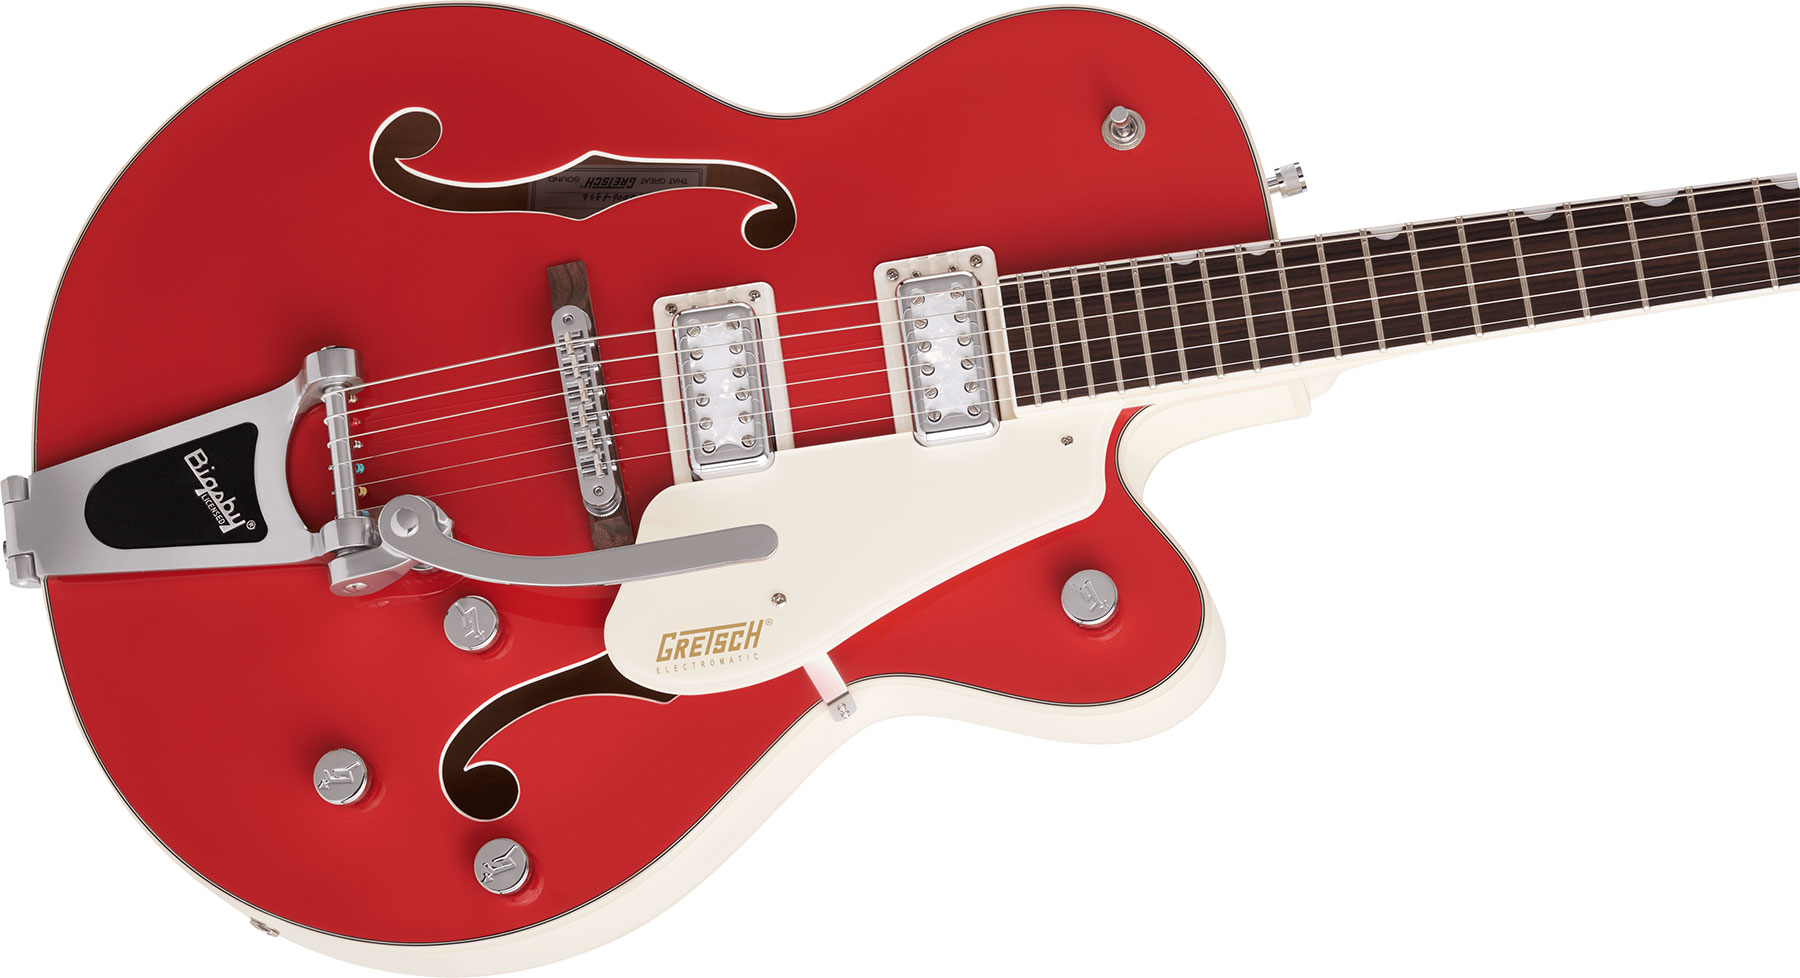 Gretsch G5410t Tri-five Electromatic Hollow Hh Bigsby Rw - 2-tone Fiesta Red On Vintage White - Semi-Hollow E-Gitarre - Variation 2